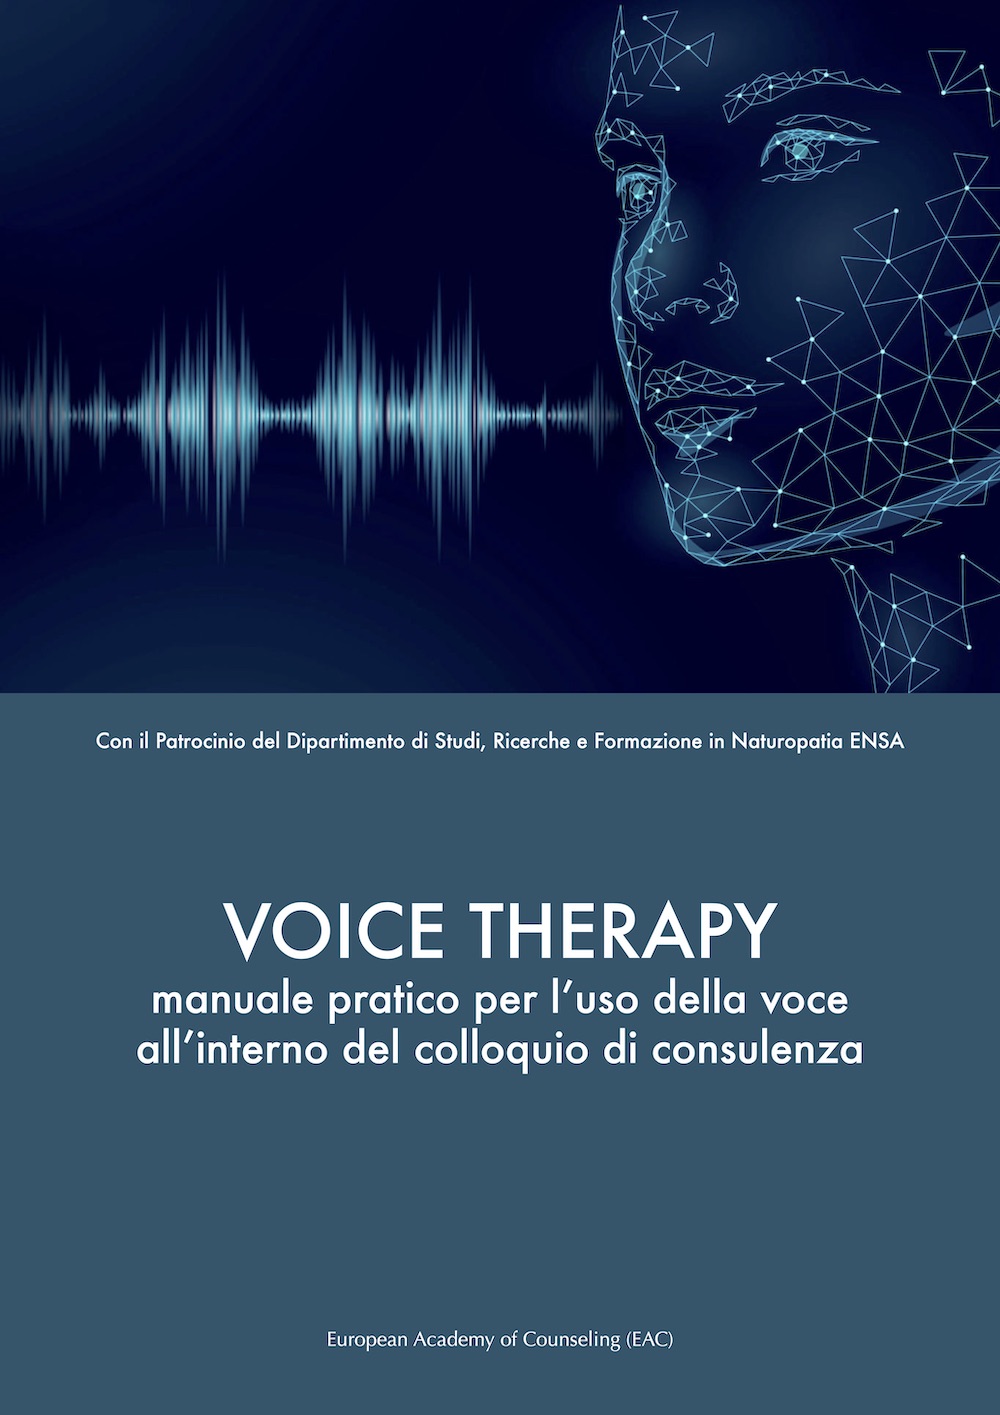 Voice therapy